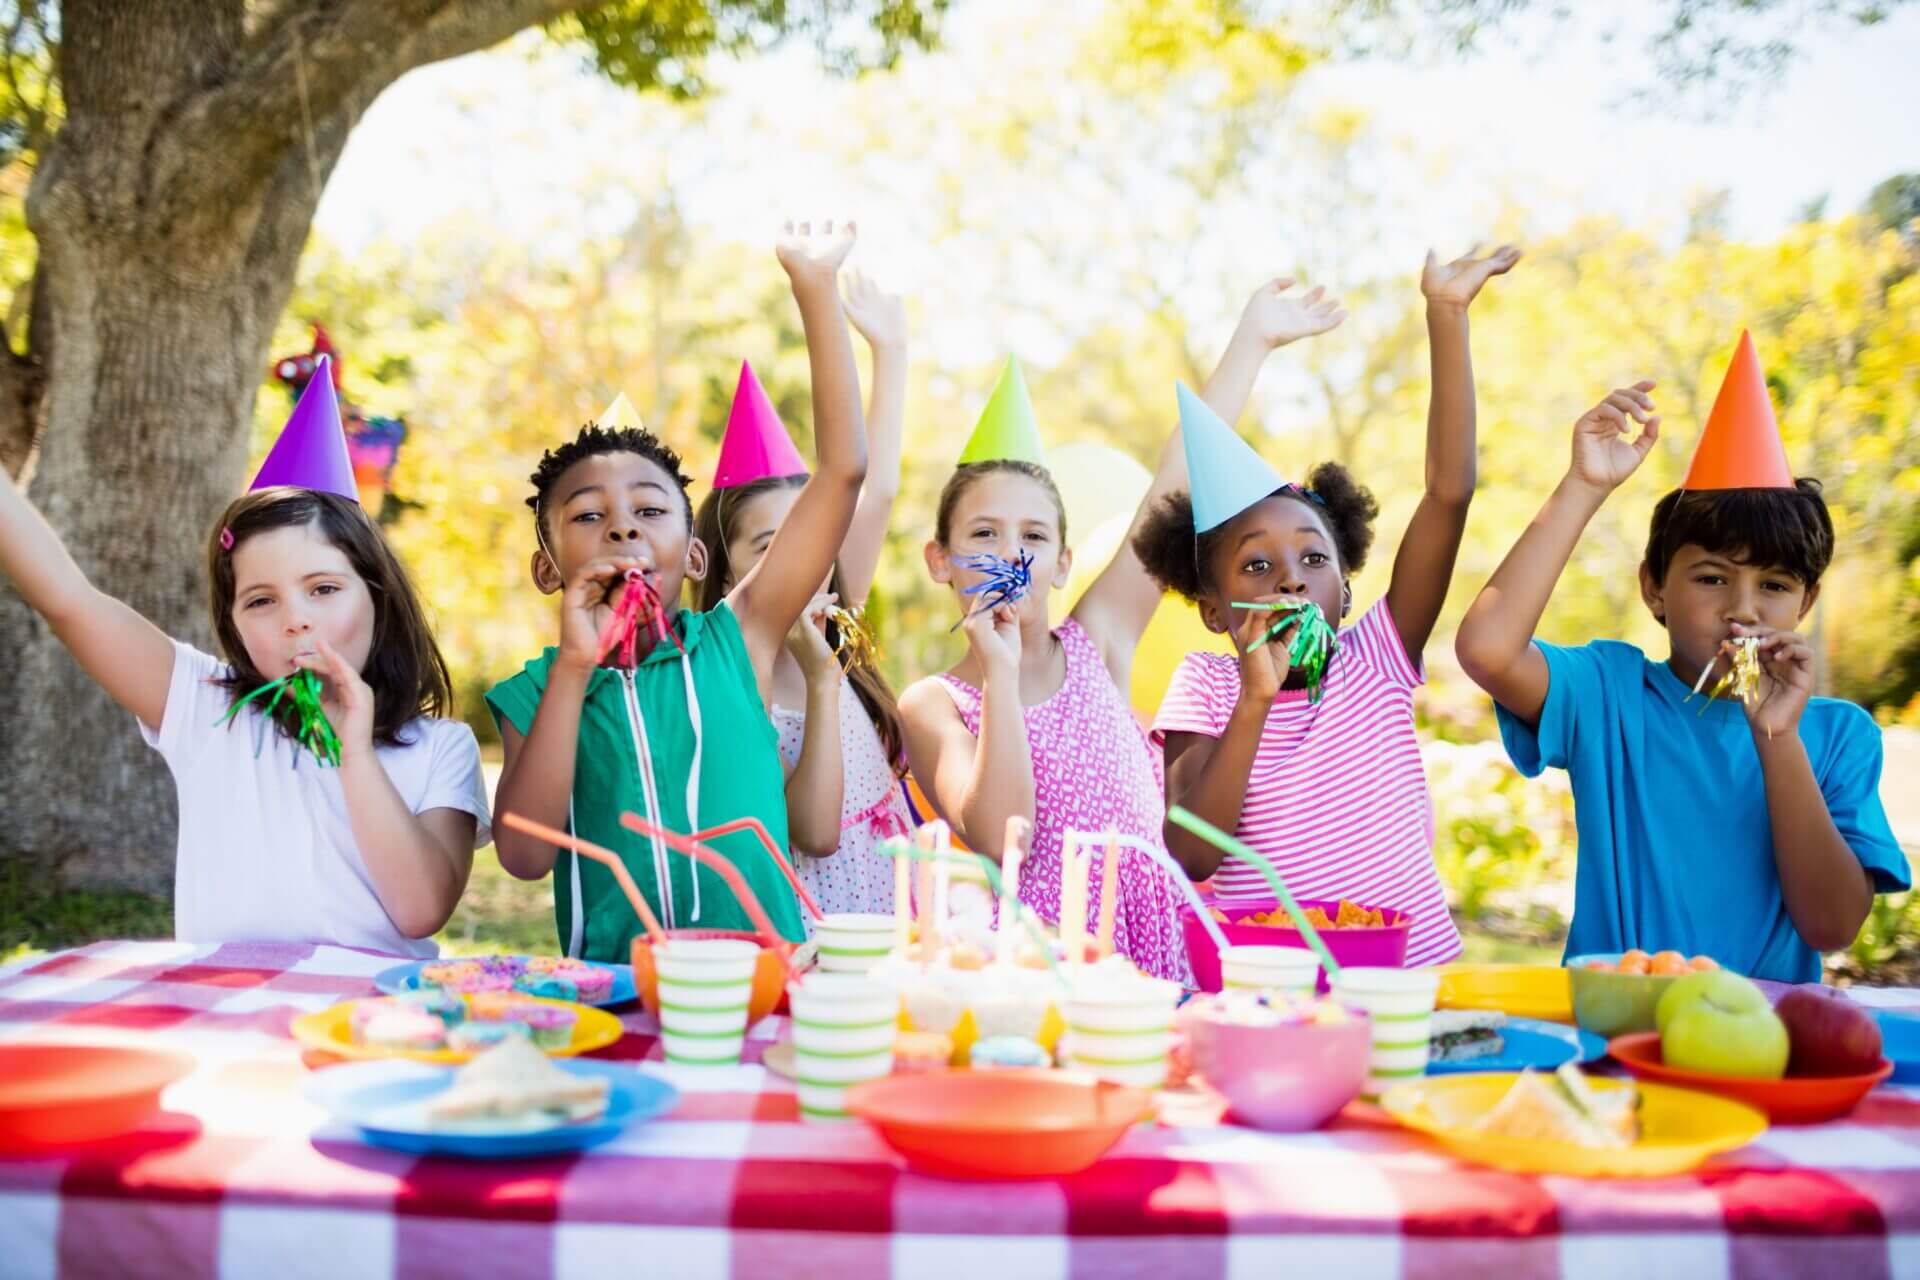 How to Have an Amazing and Memorable Kid’s Birthday Party